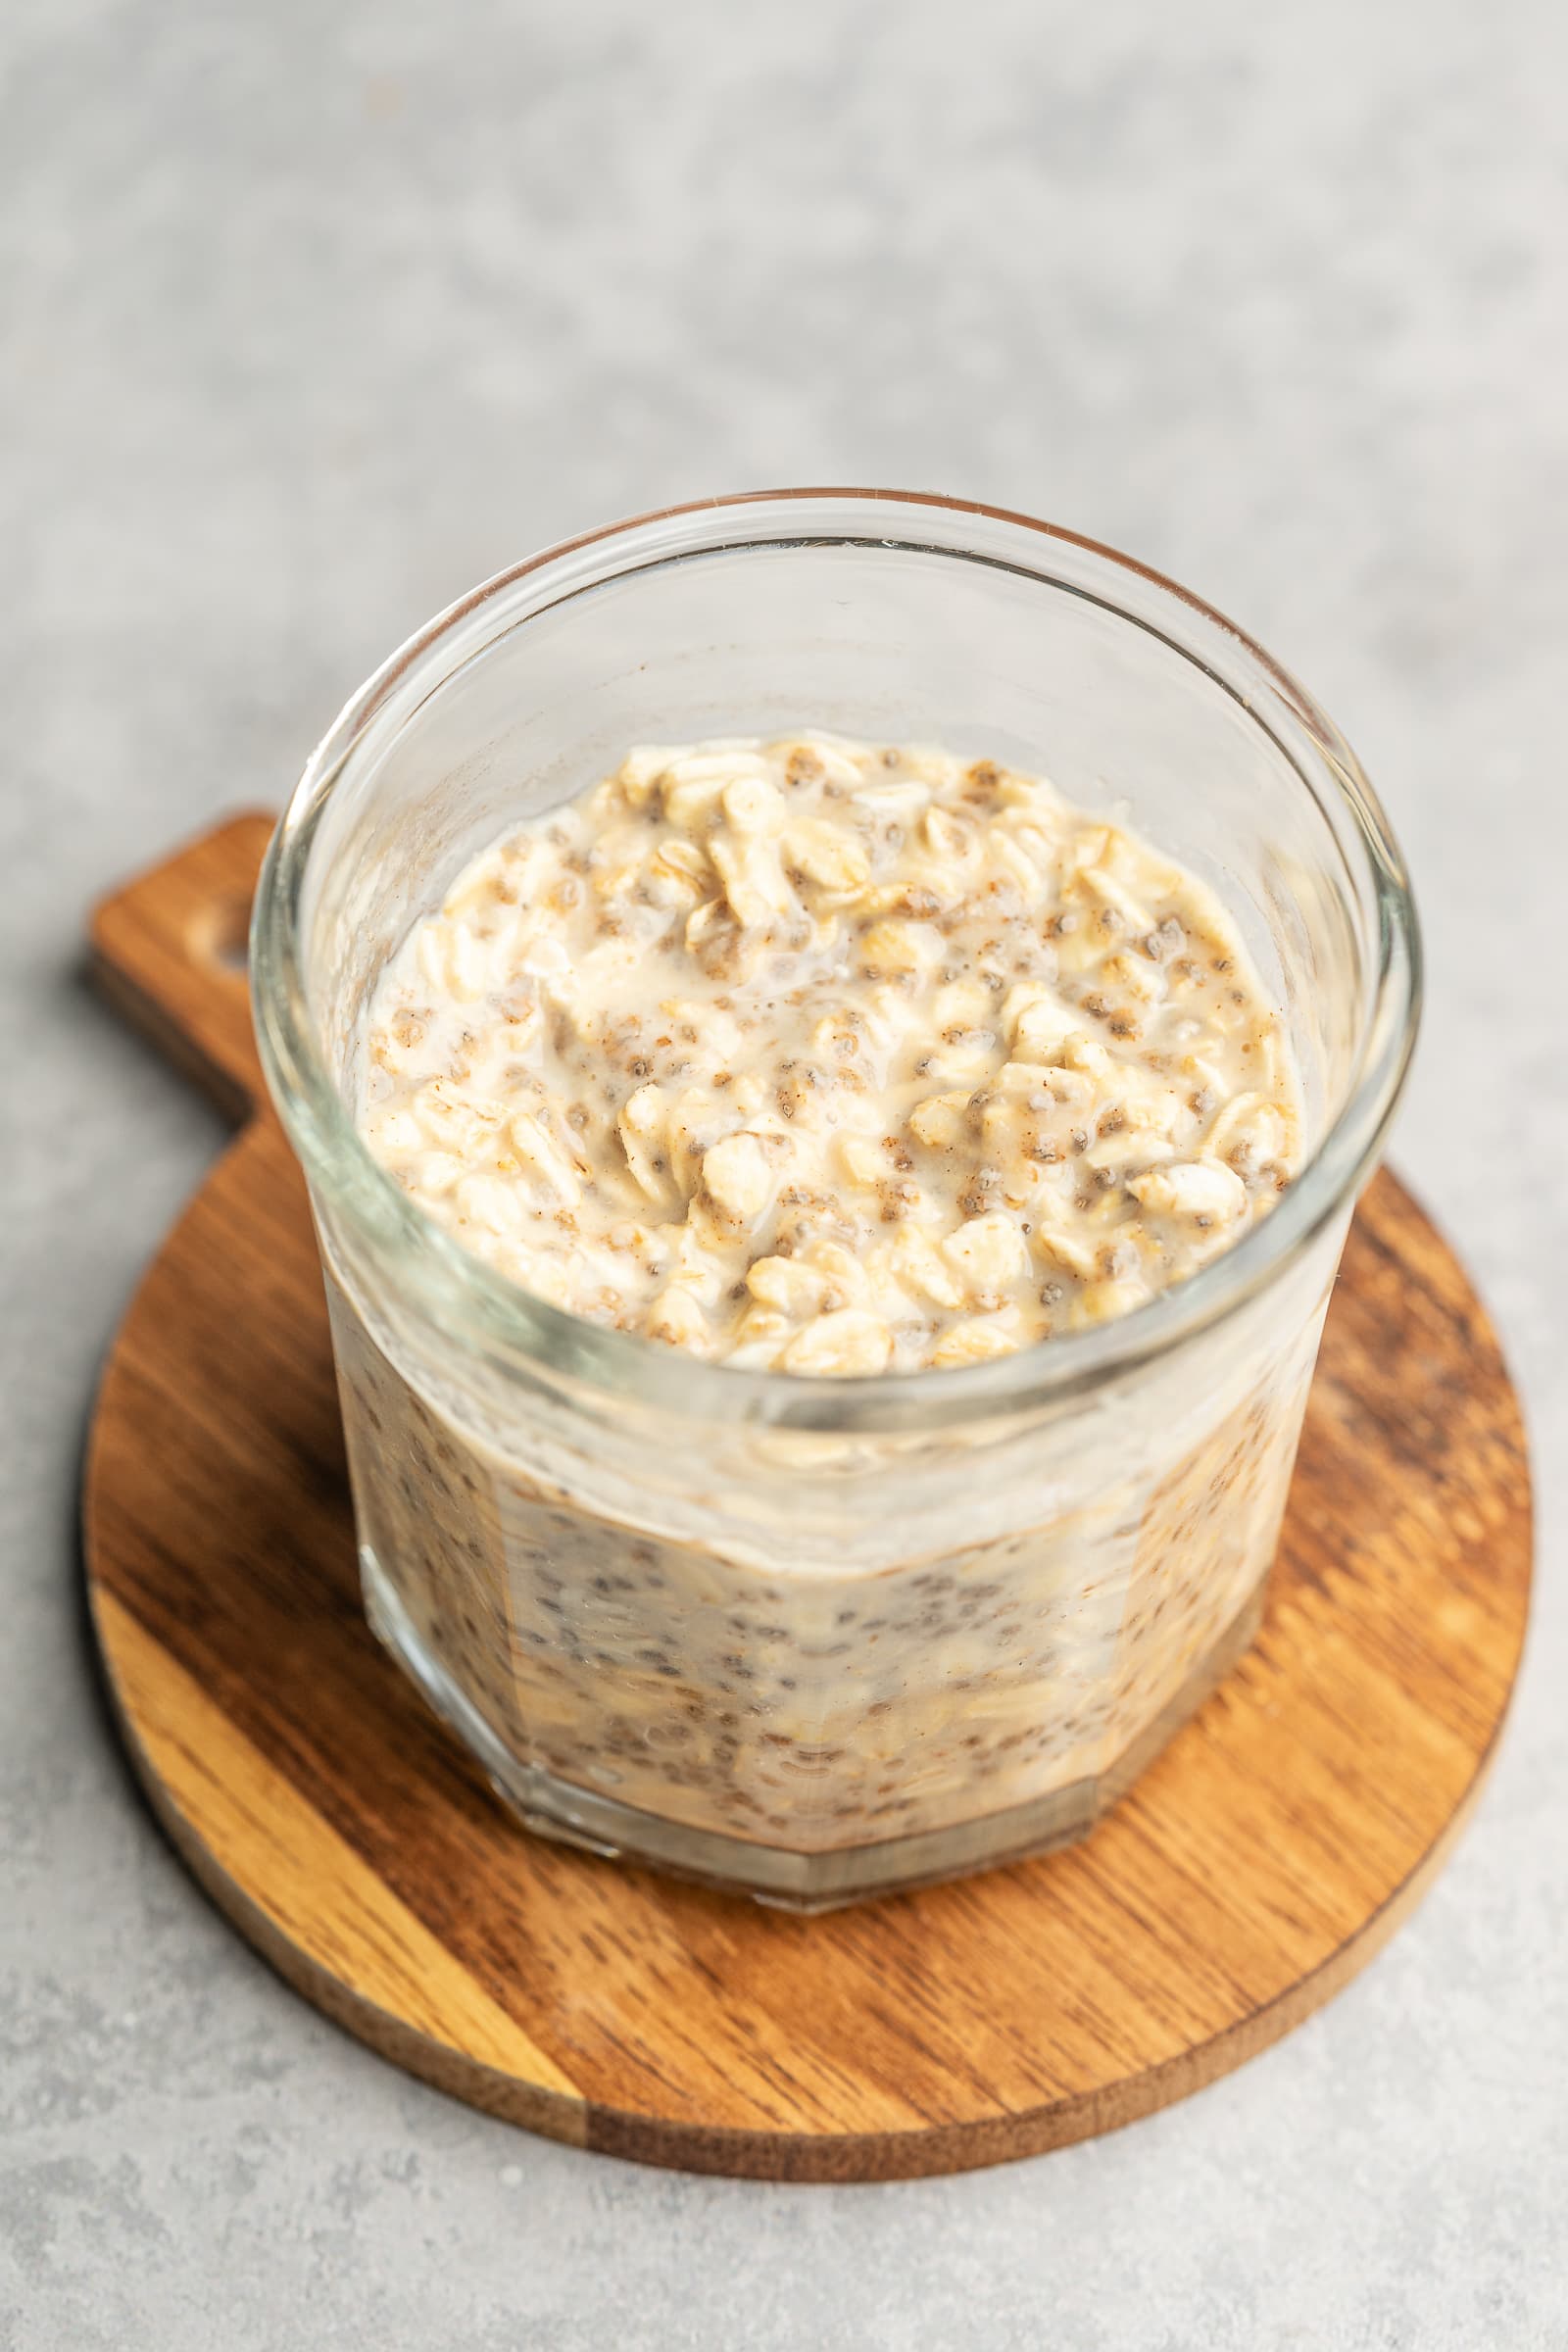 Overnight oats in a glass jar after being refrigerated overnight.